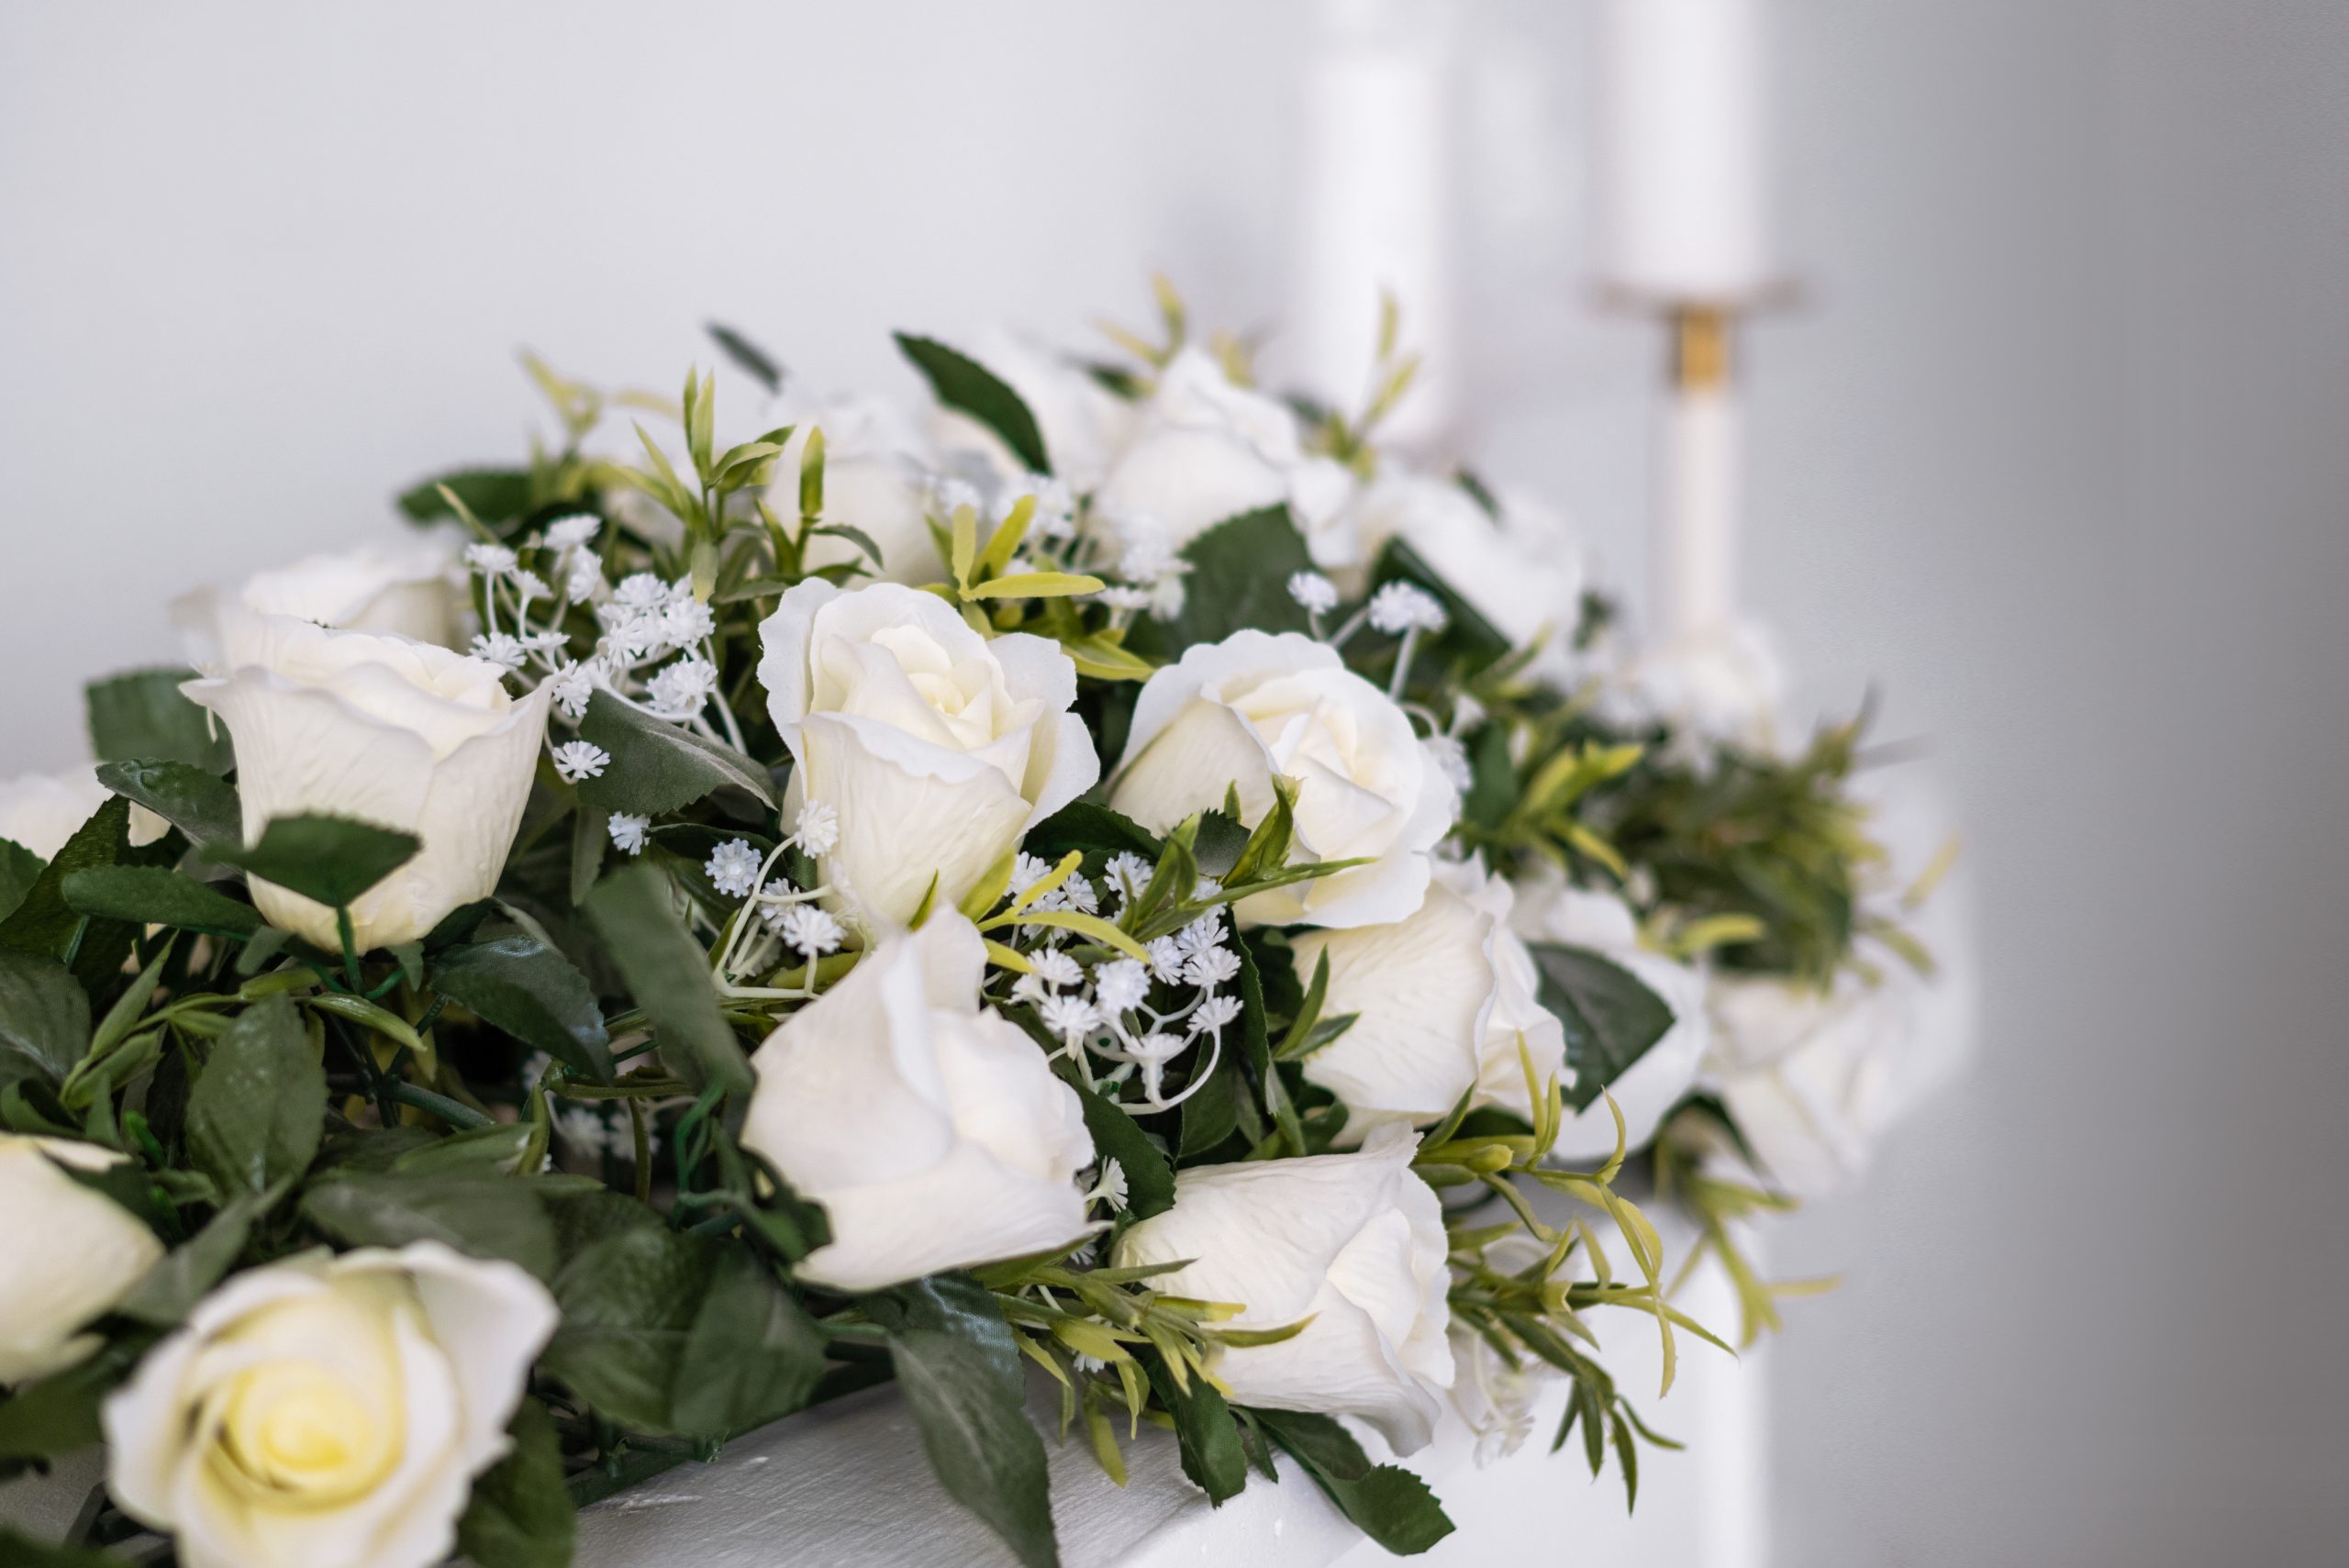 Decorative flower arrangement of white roses on the fireplace